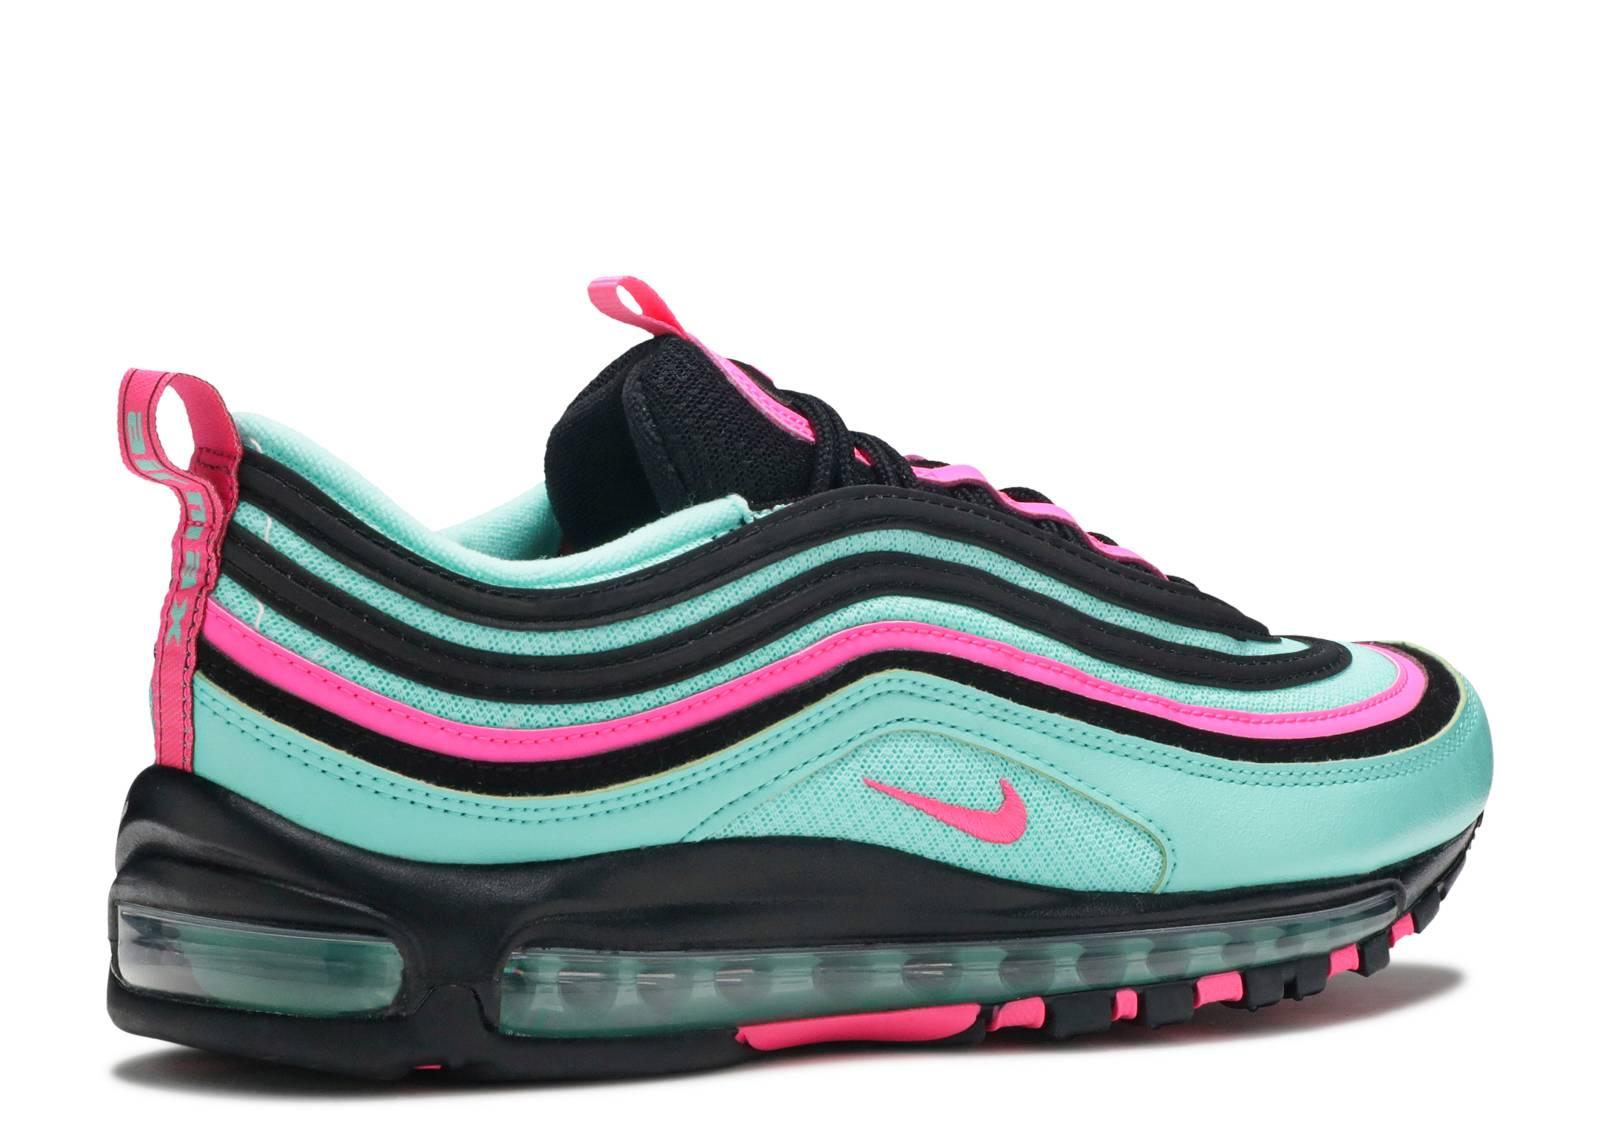 Nike Air Max 97 'hyper Turquoise' in 